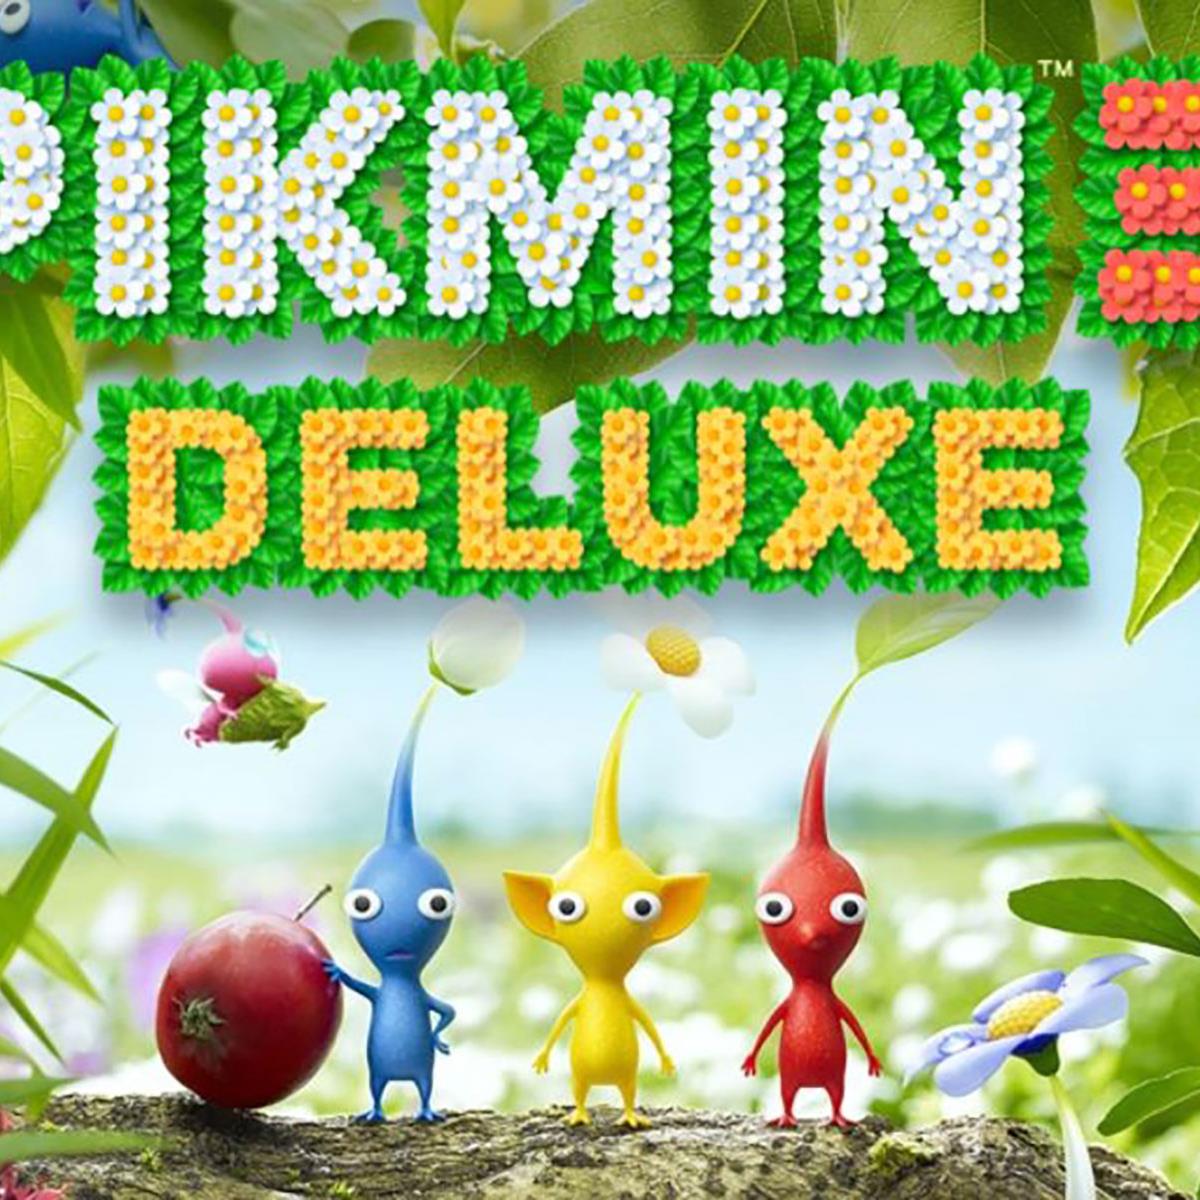 October Deluxe Headed In Missions HotHardware With To Pikmin Switch 3 New | Nintendo